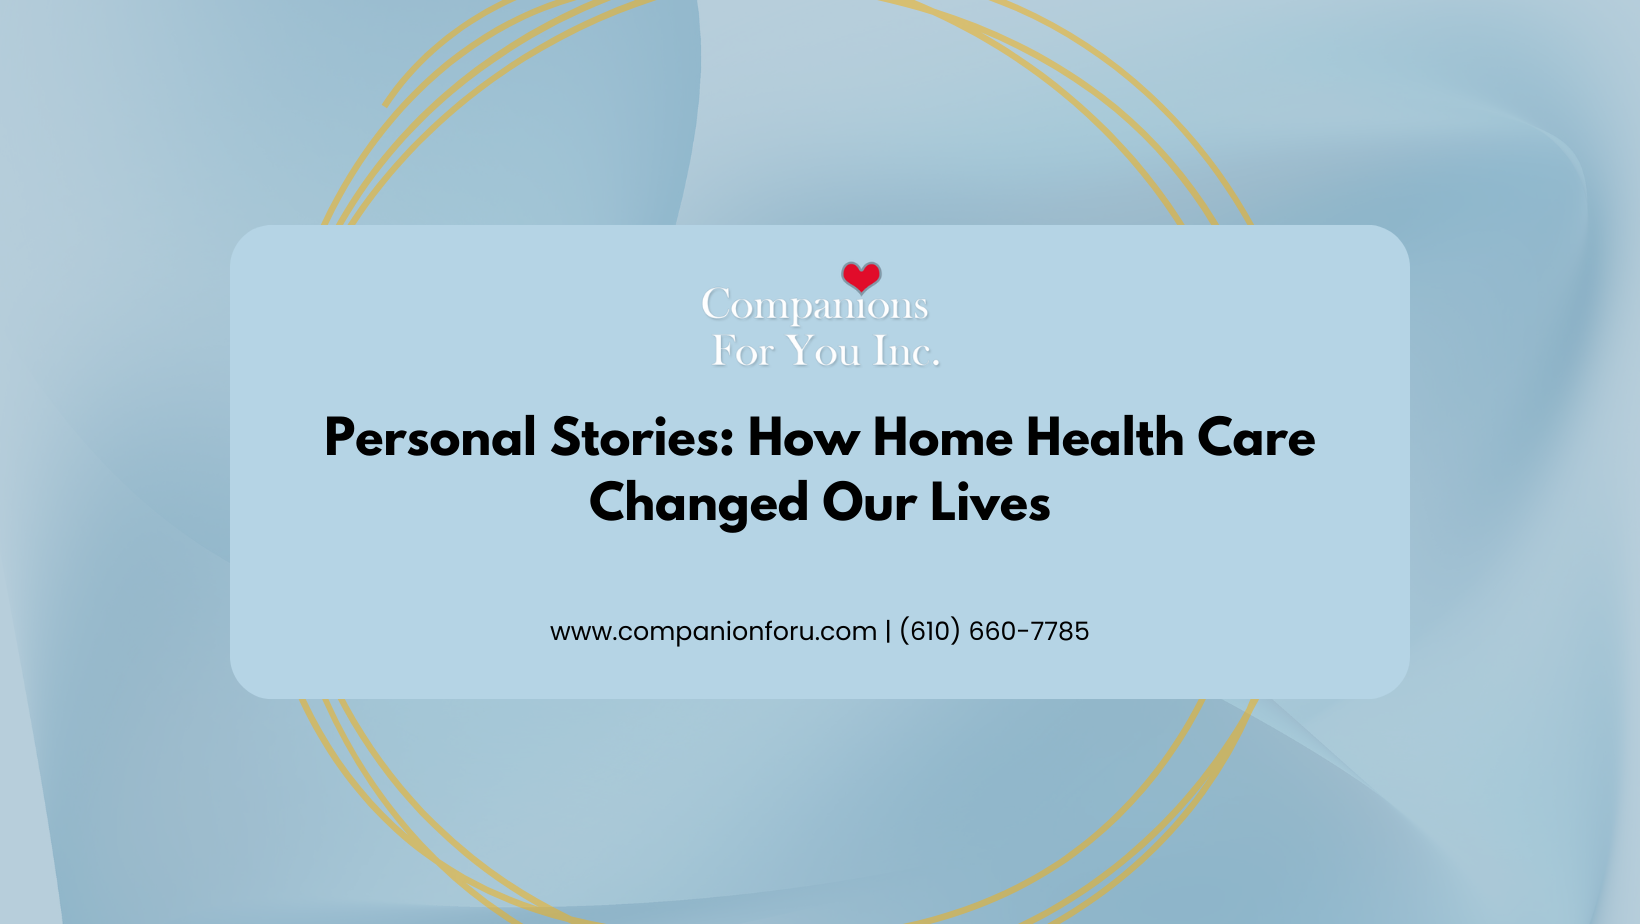 Personal Stories: How Home Health Care Changed Our Lives